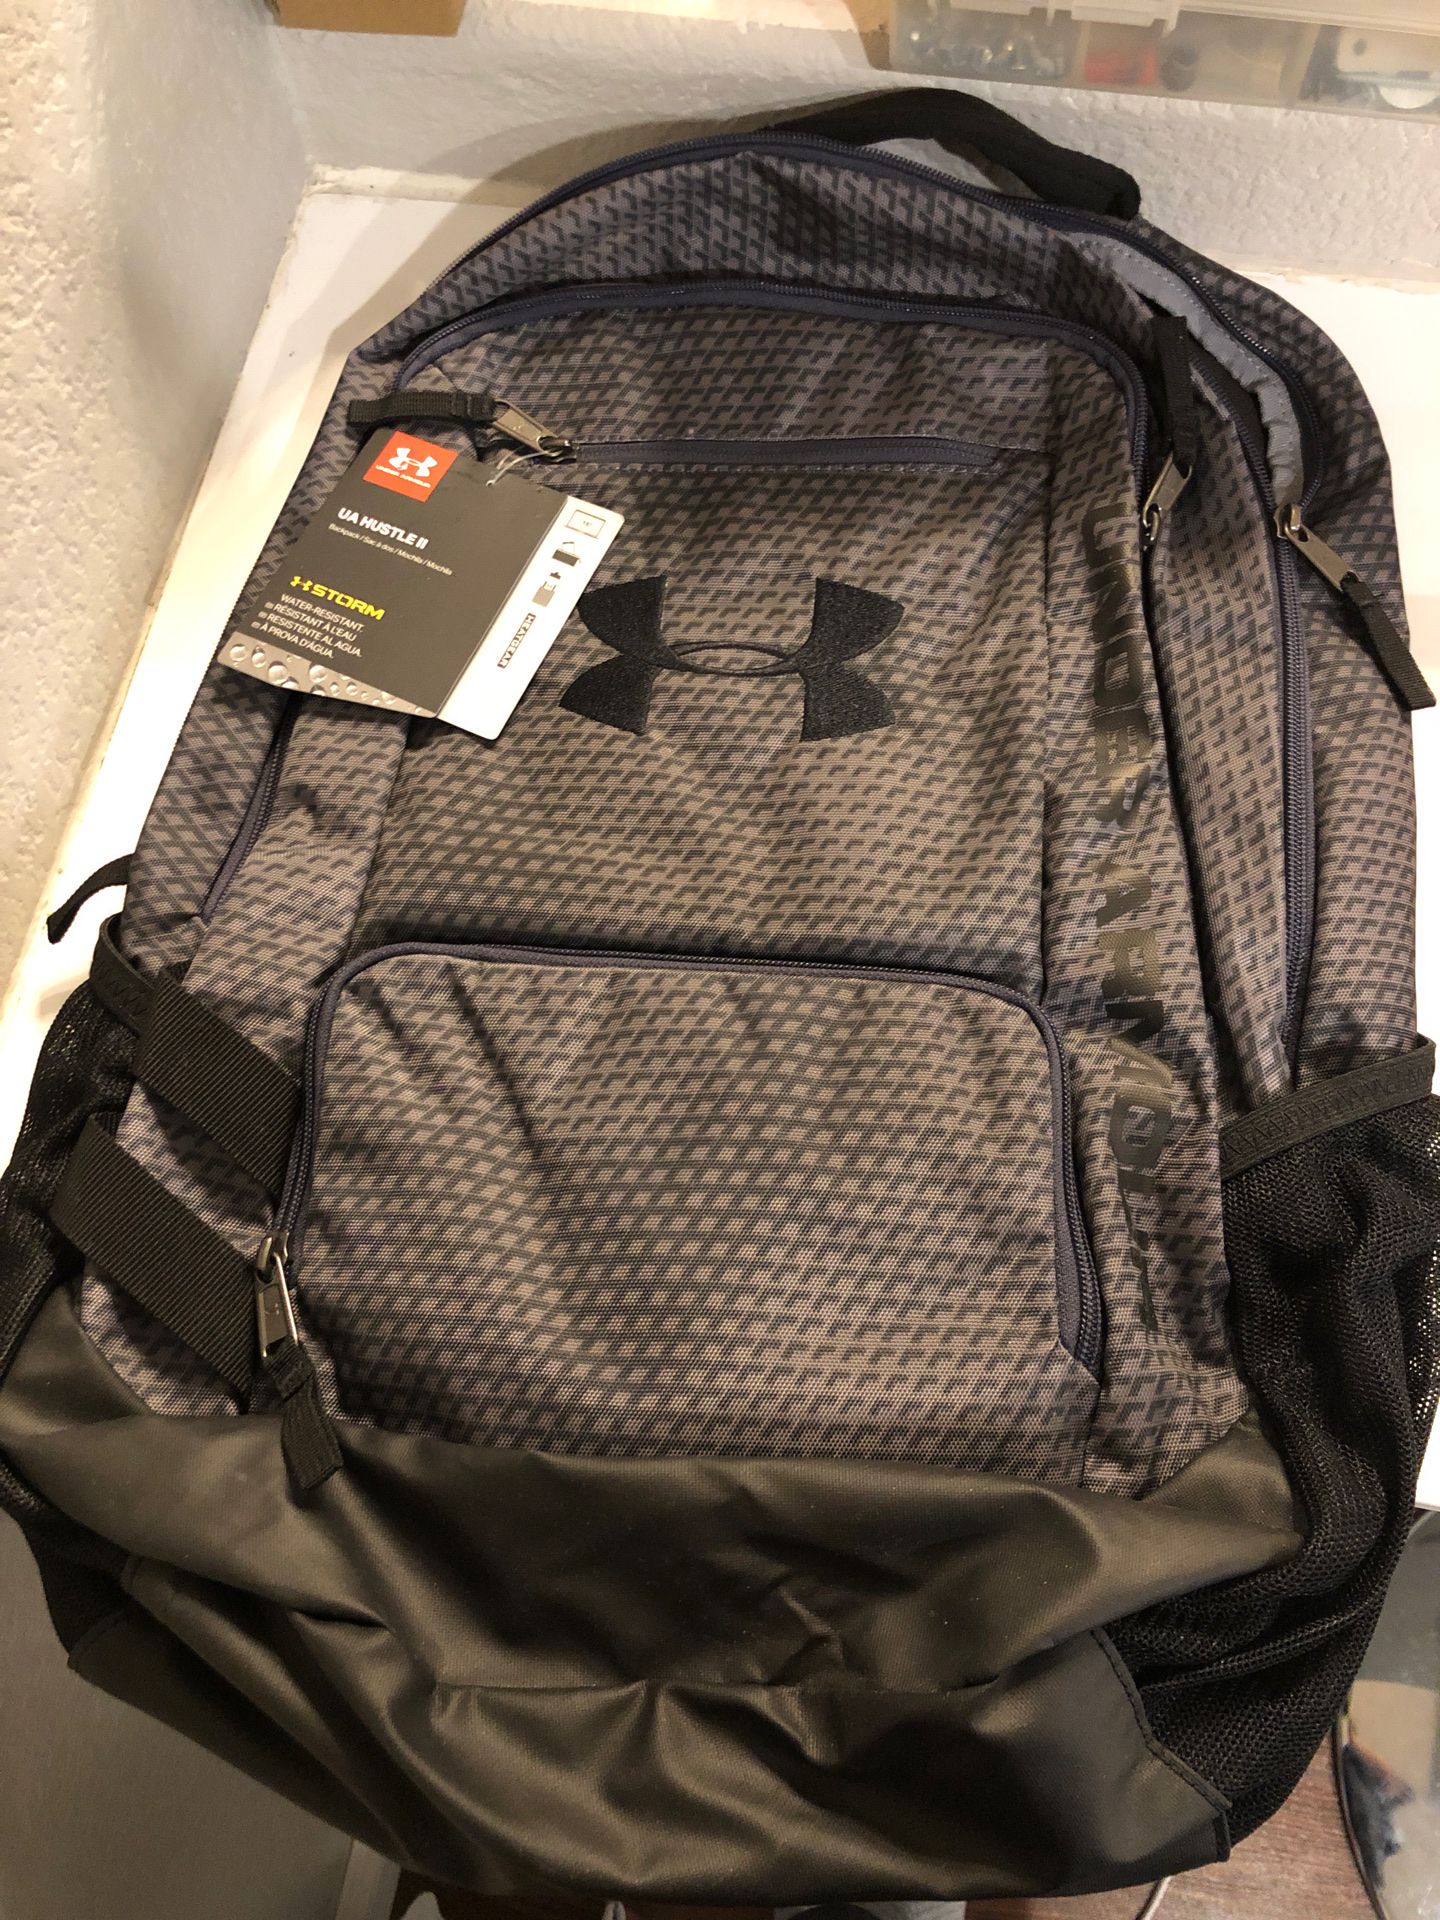 Under armour backpack